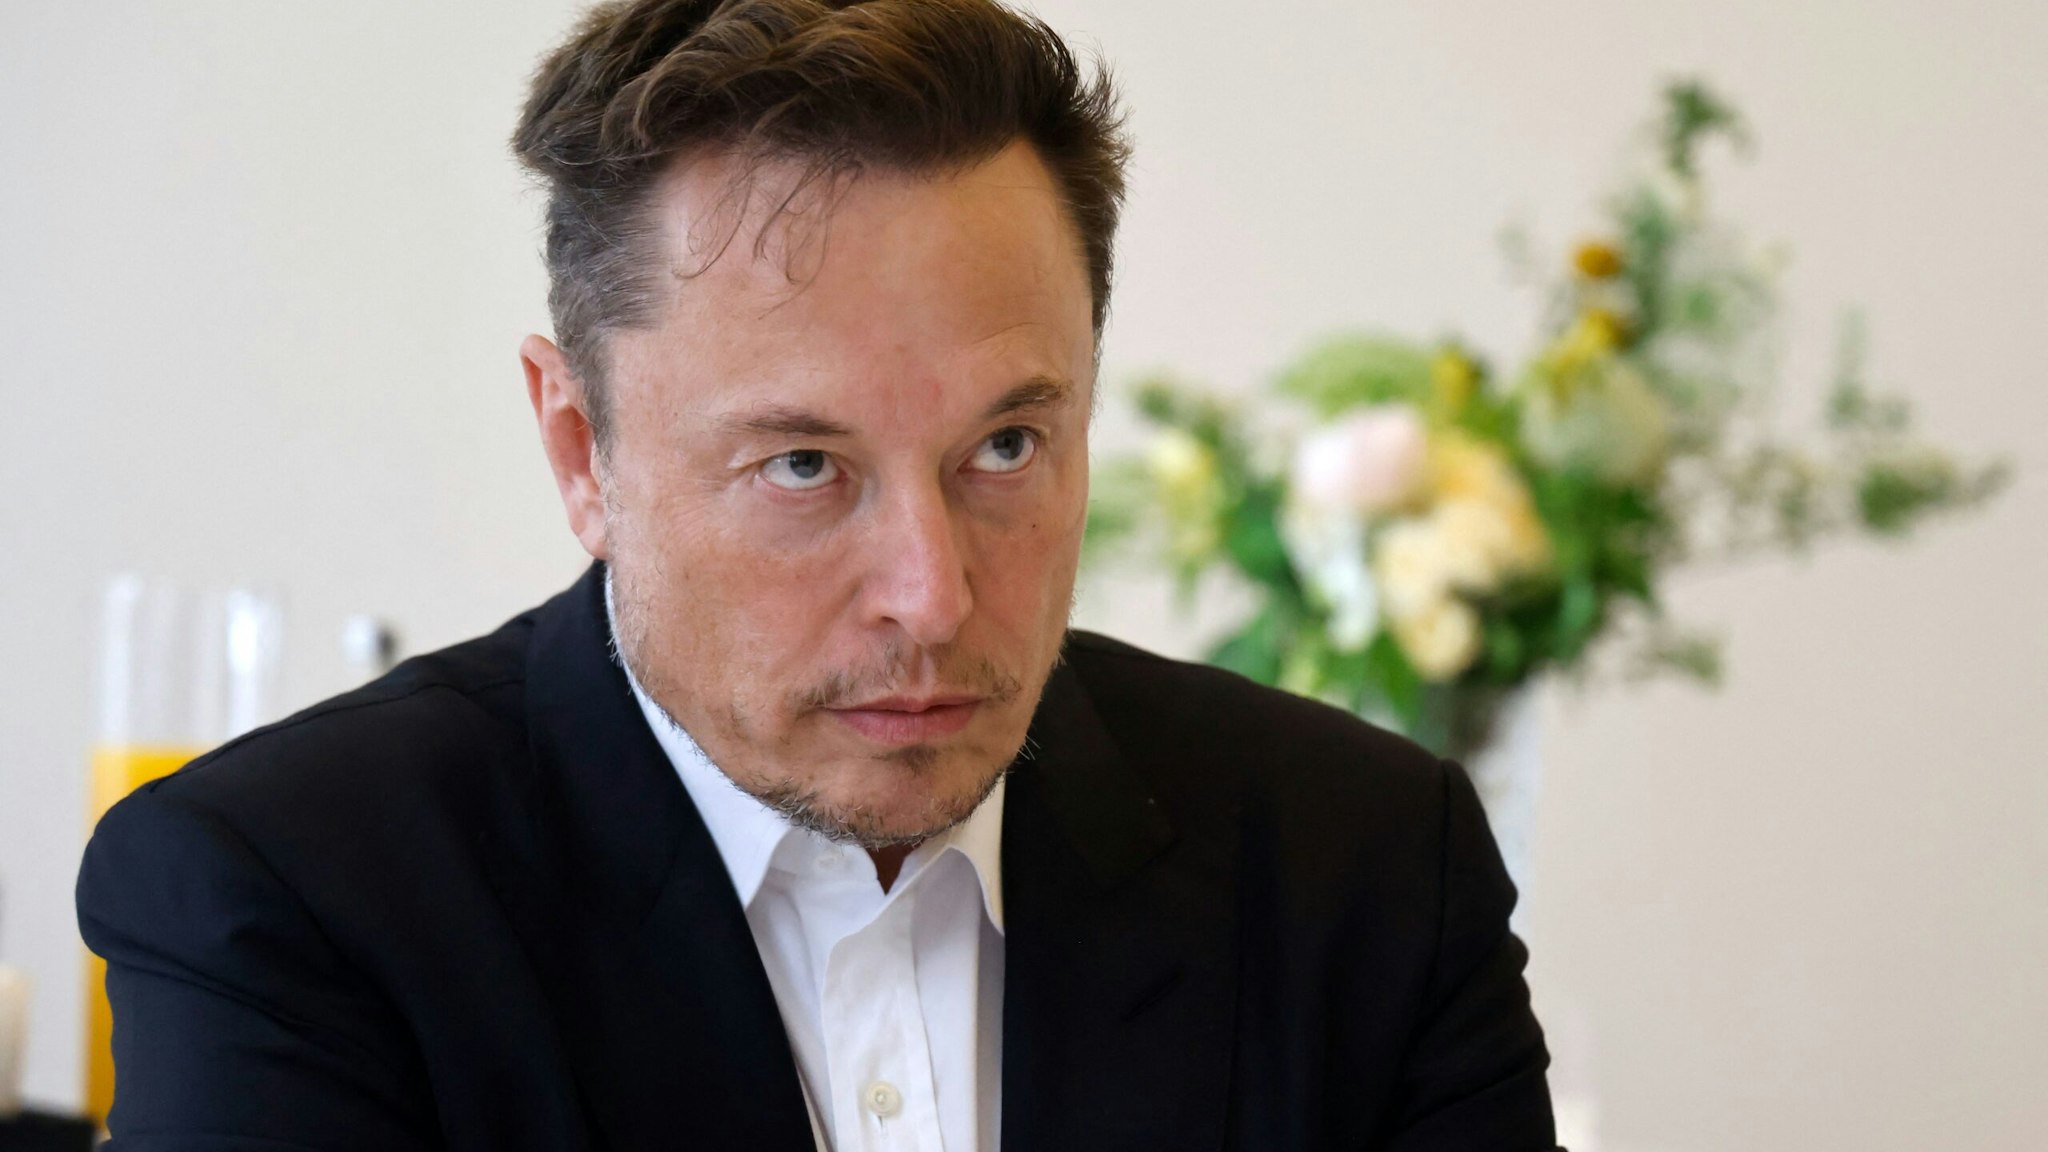 Elon Musk retweeted The Daily Wire's "What Is A Woman?" after a night of confusion at Twitter.